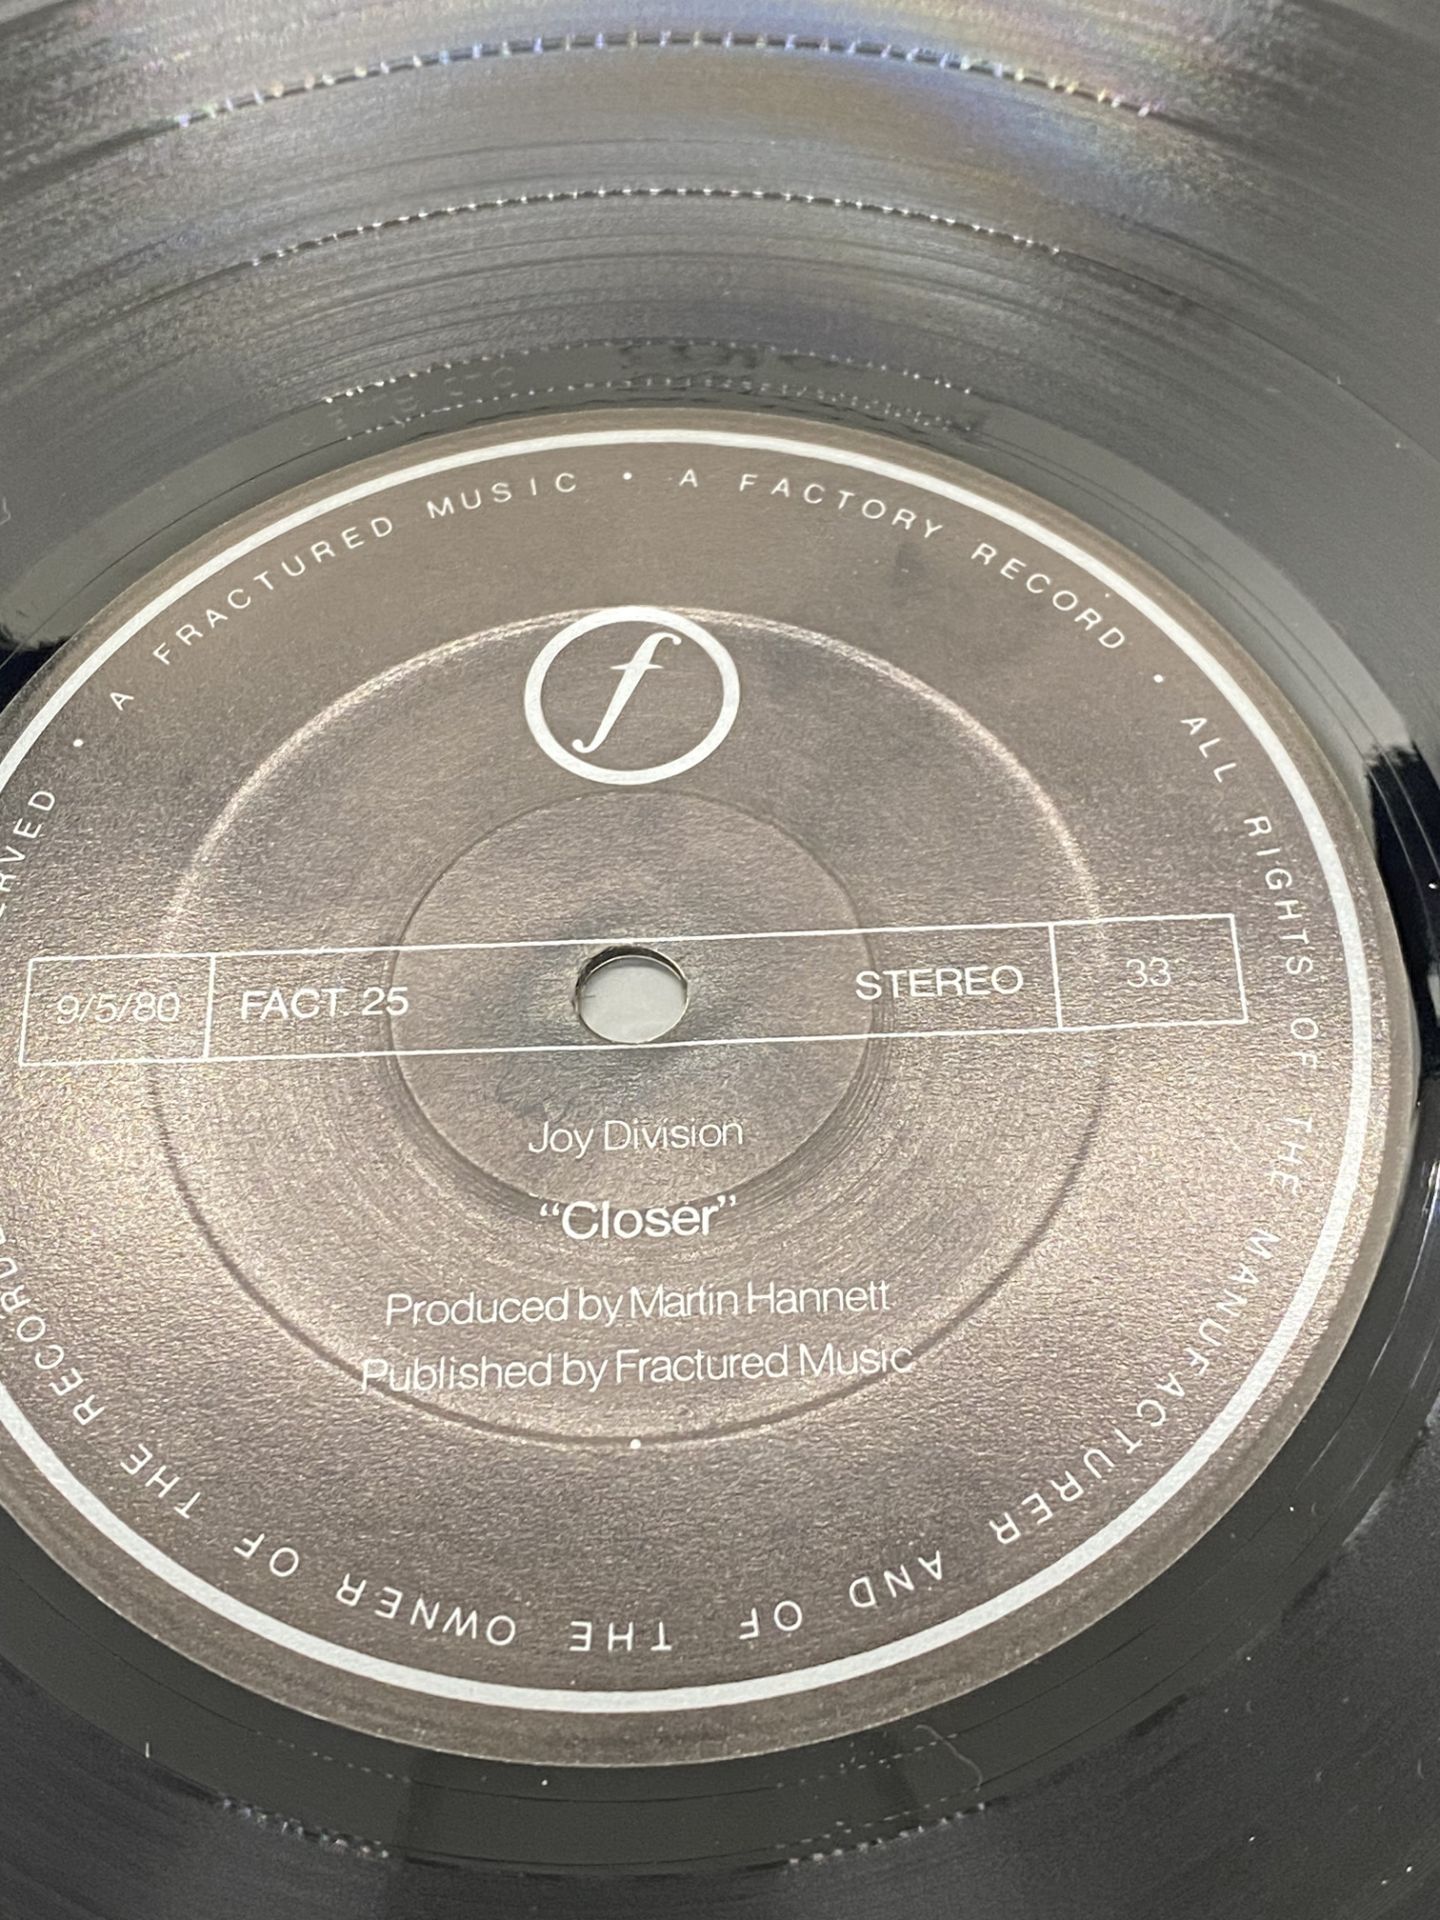 JOY DIVISION - CLOSER ALBUM - FROM PRIVATE COLLECTION - Image 5 of 11